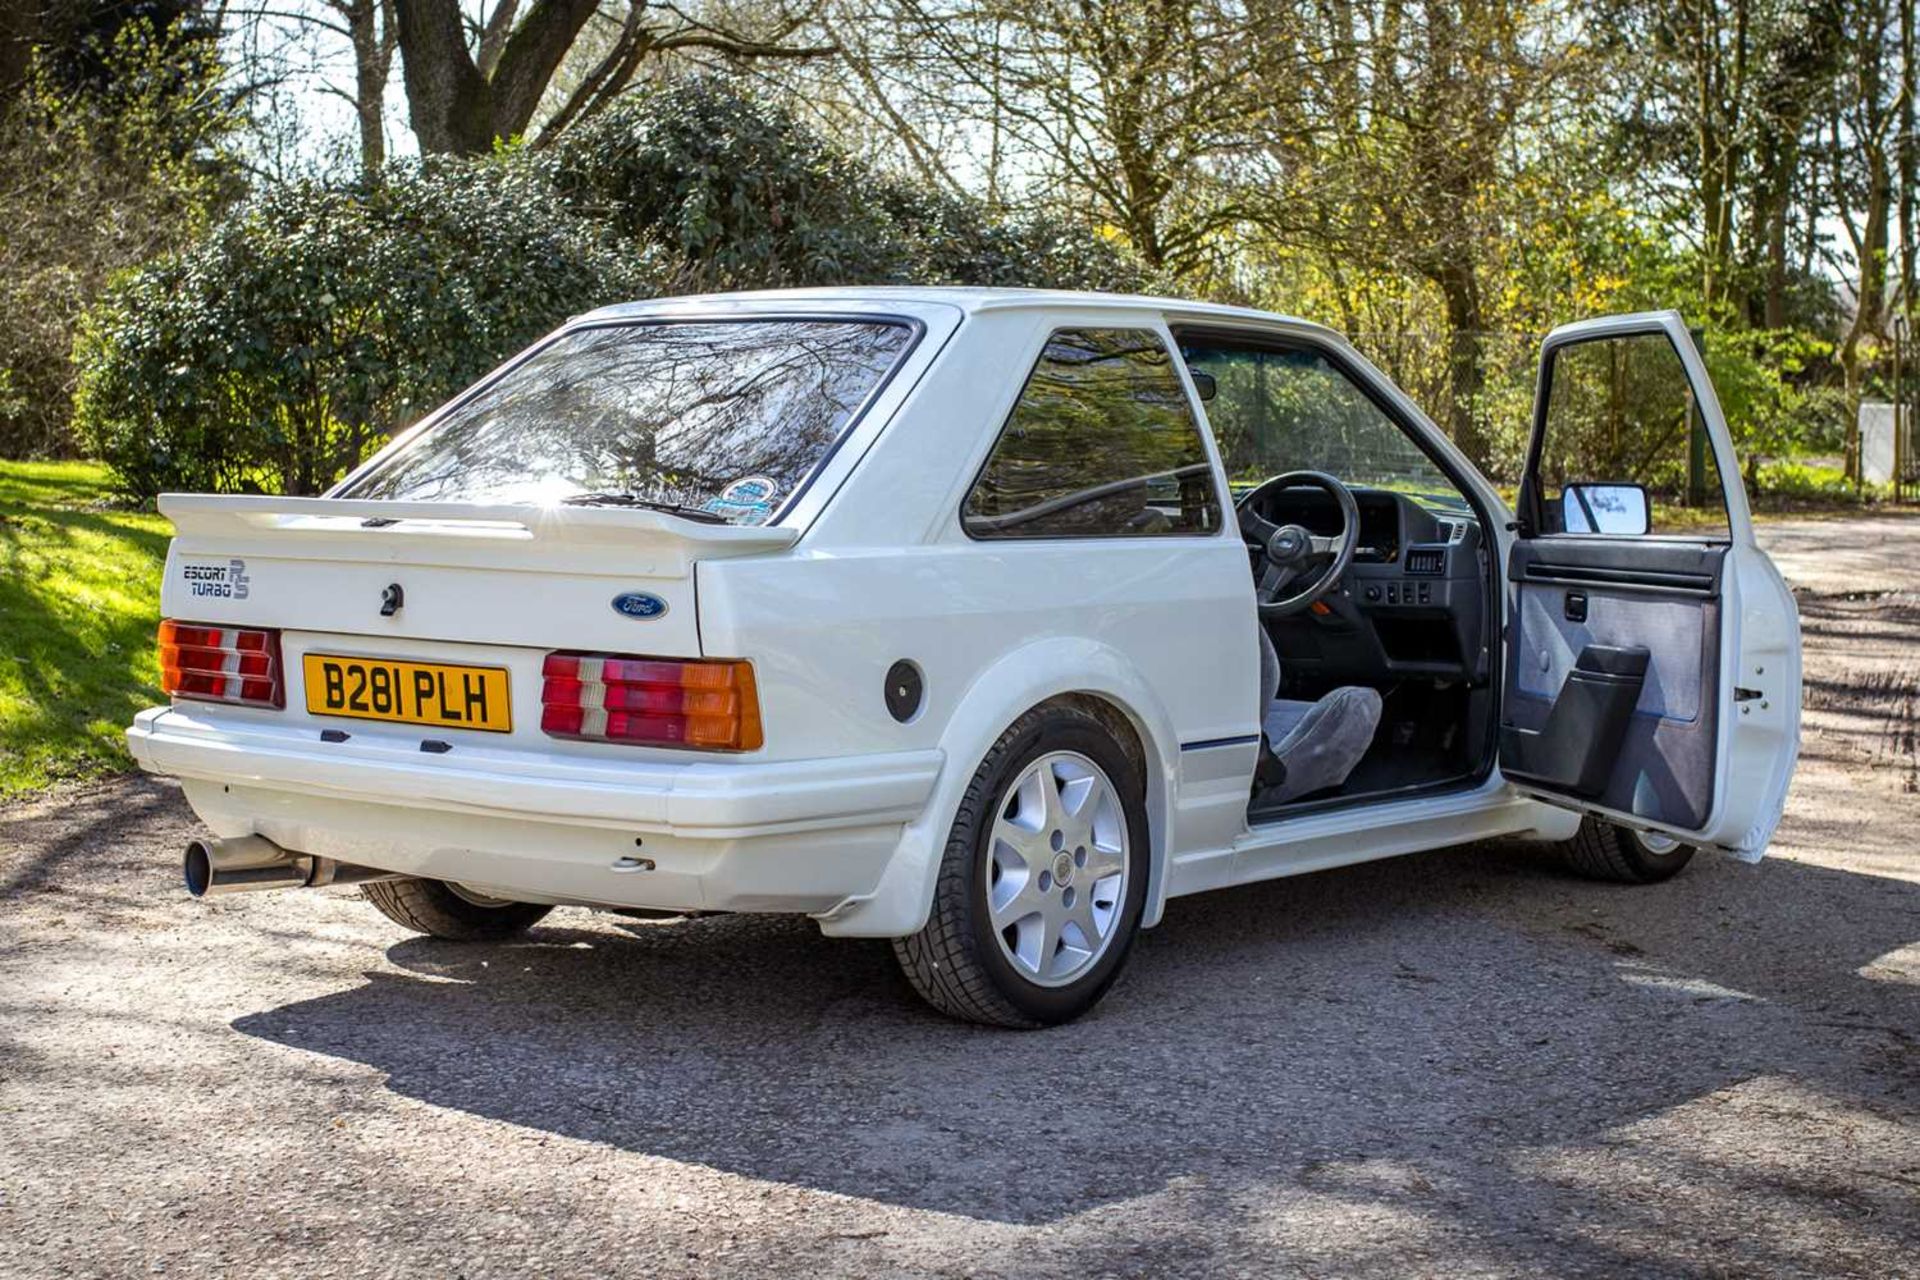 1985 Ford Escort RS Turbo S1 Subject to a full restoration  - Image 50 of 76